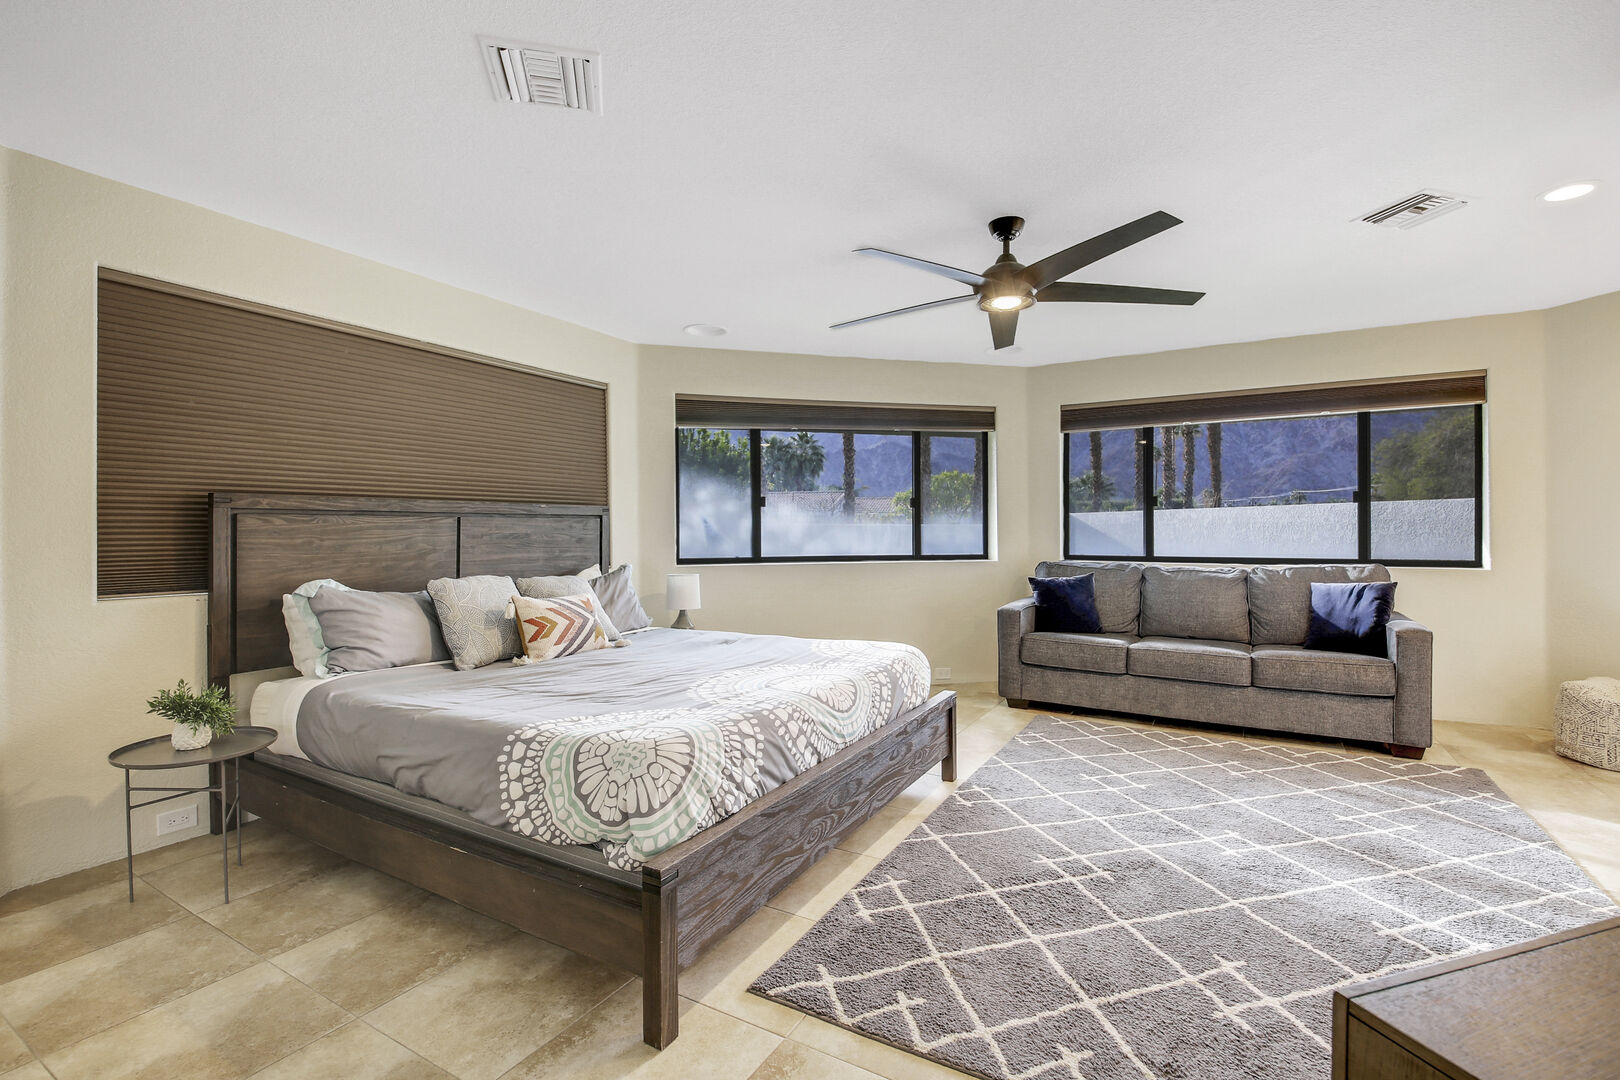 Bedroom 3 is located next to Master Suite 1 and features a Queen-sized Bed and a Queen-sized Sofa Sleeper.